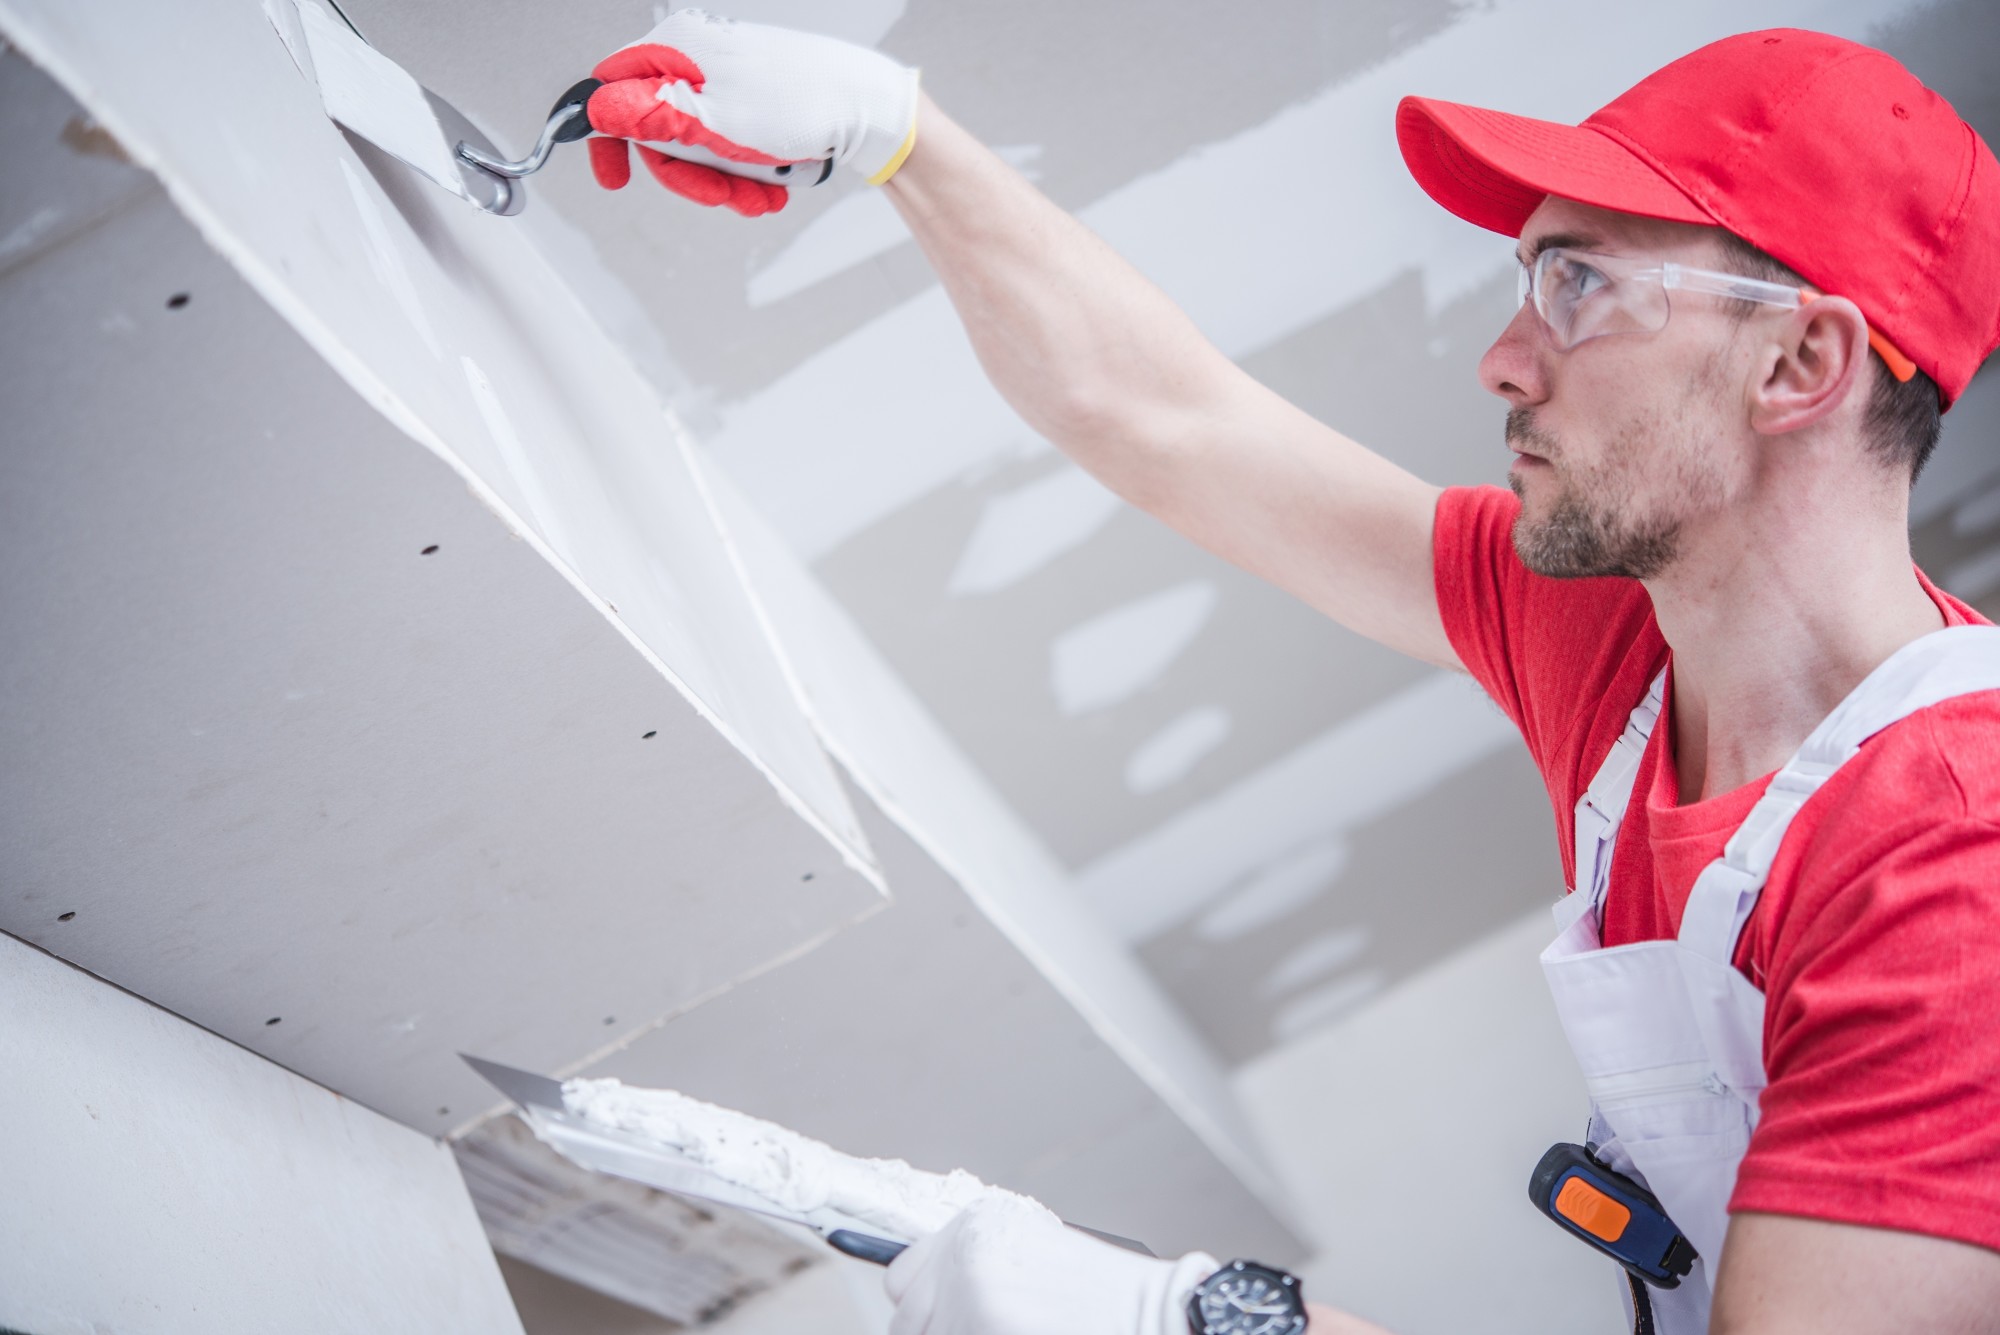 Are you wondering what you should look for when hiring the best drywall repair contractors? Keep reading and learn more here.